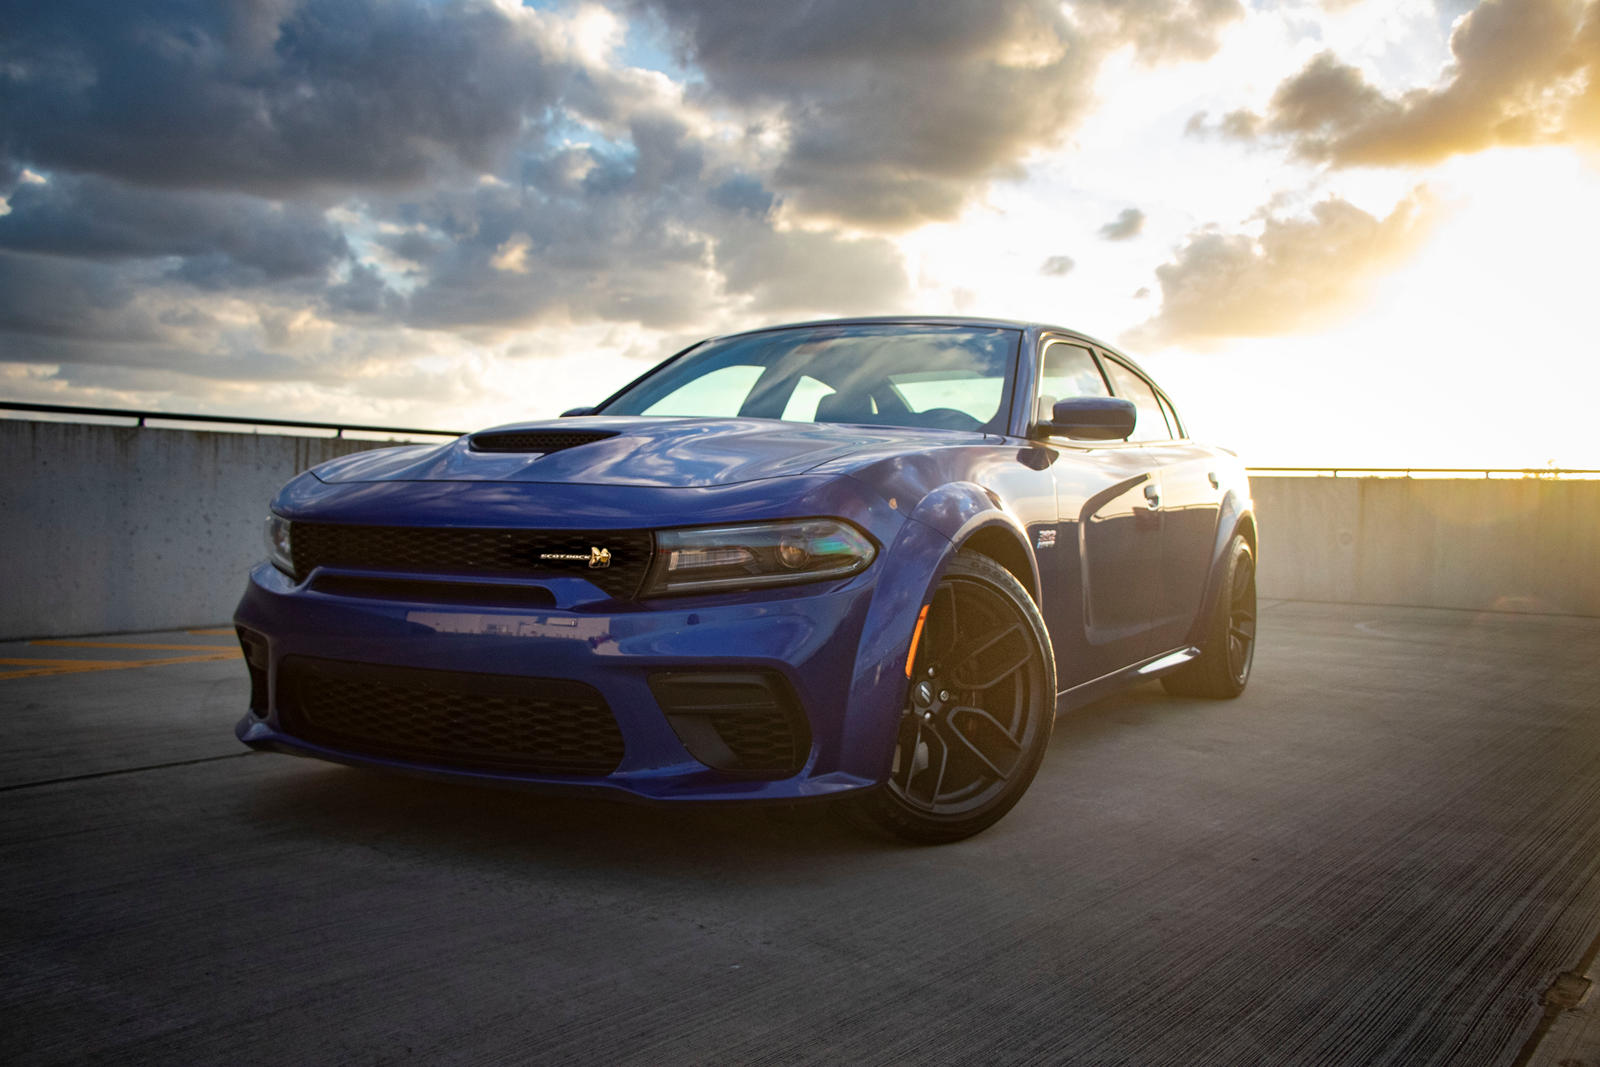 2022 Dodge Charger Vs. 2022 Ford Mustang Comparison